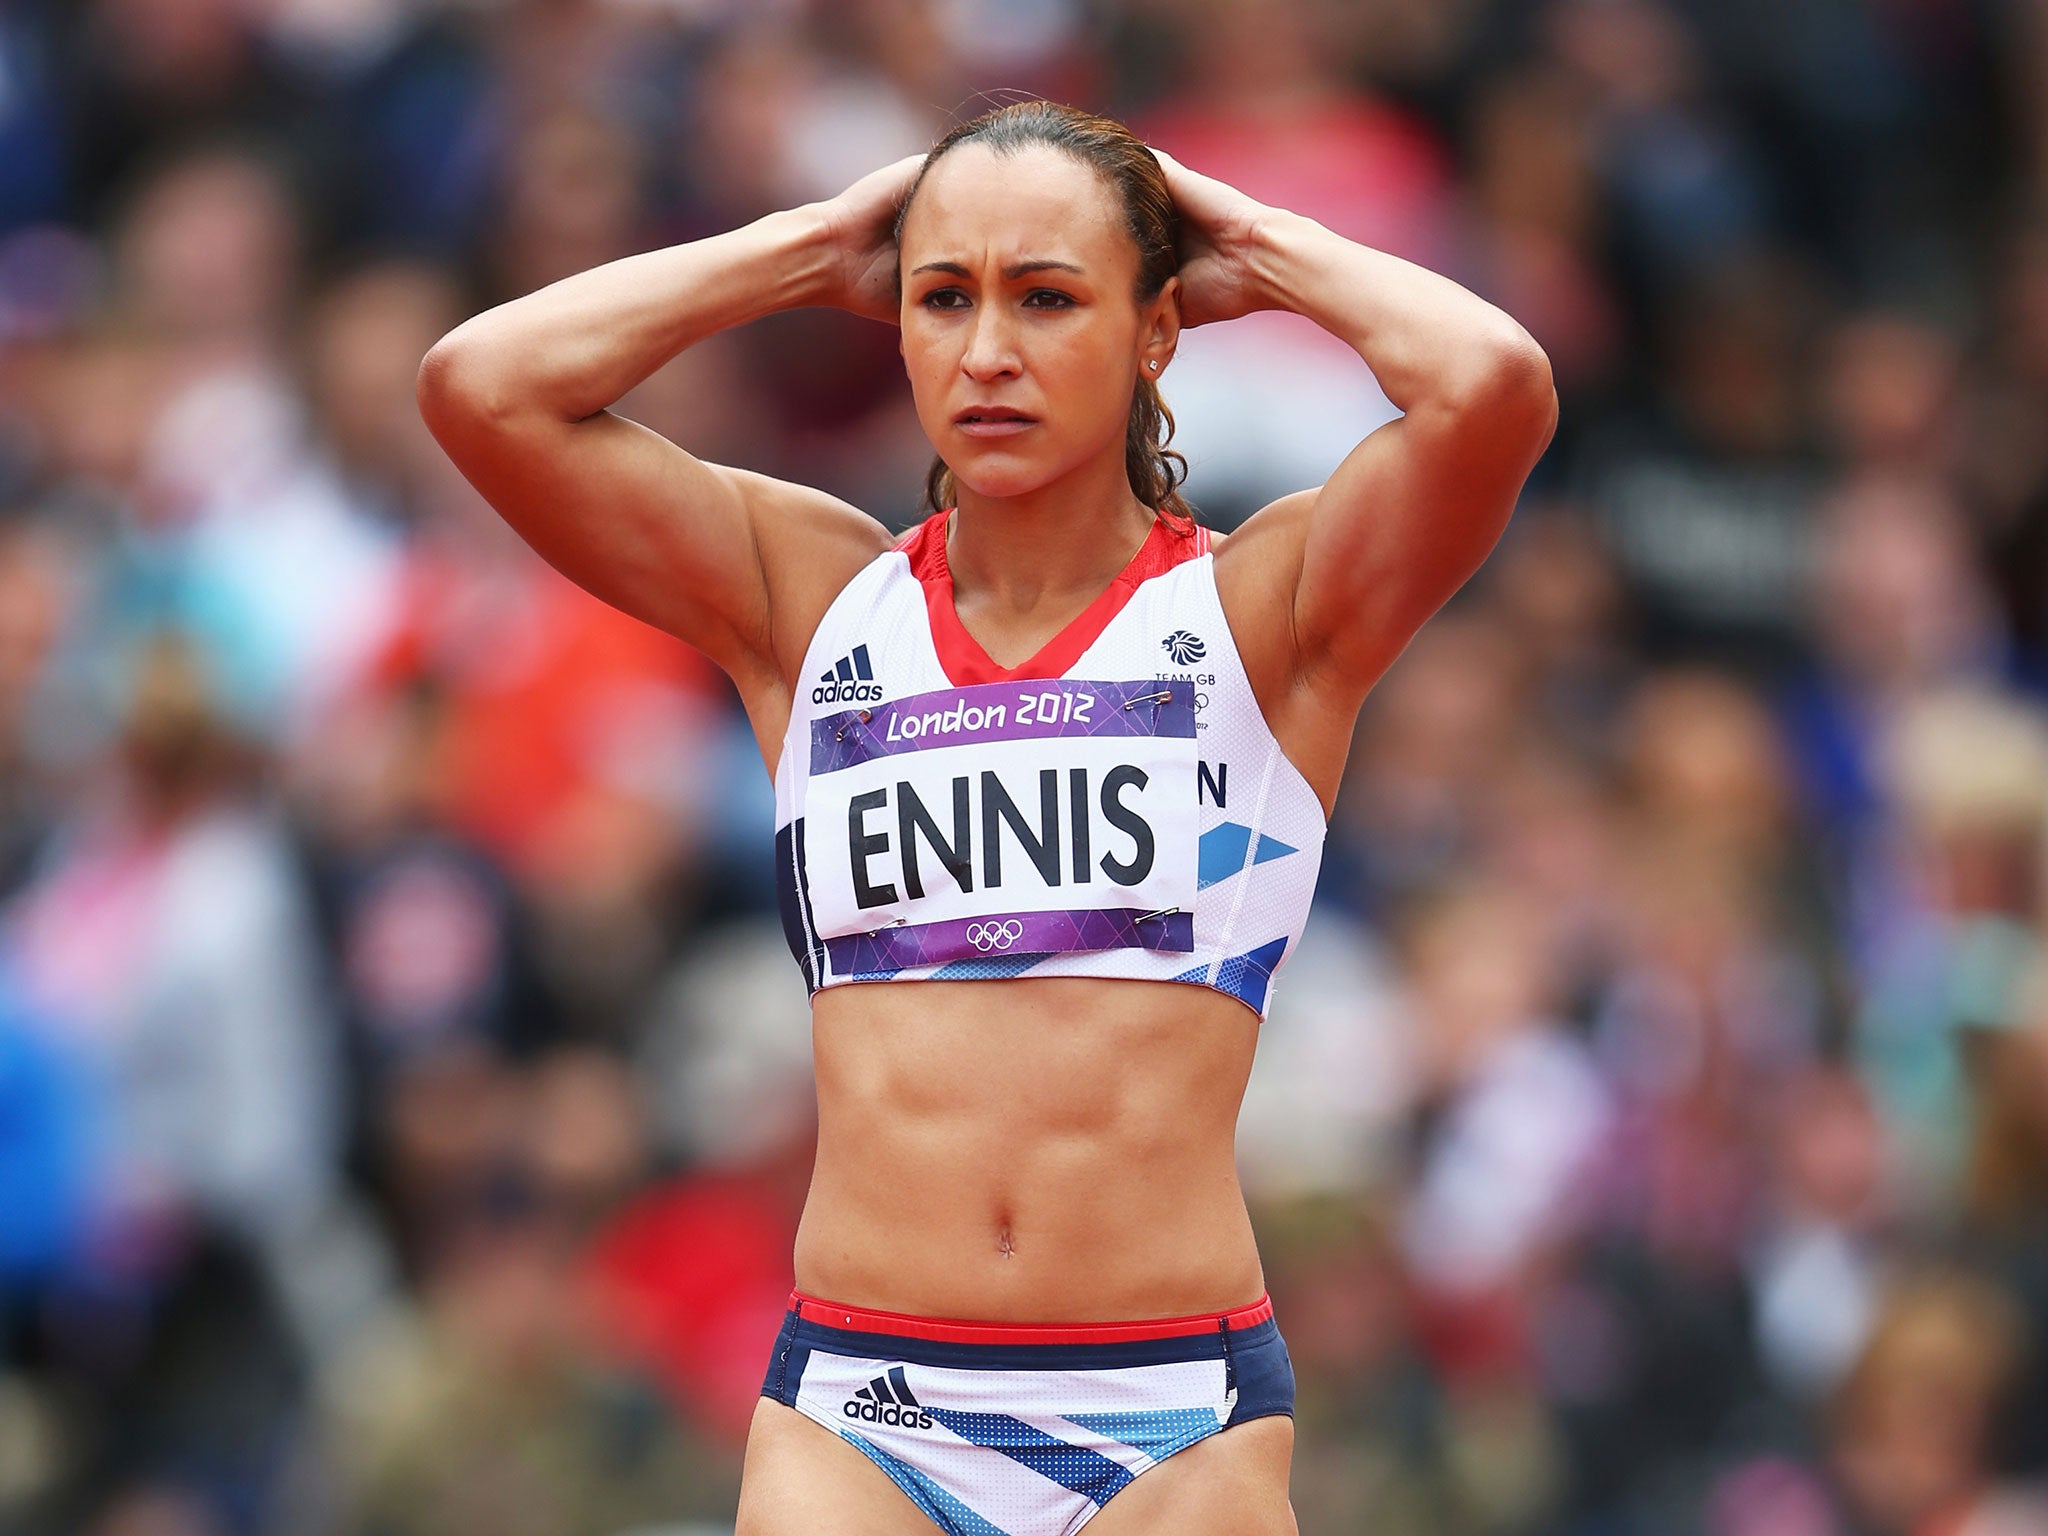 Jessica Ennis-Hill came second behind Tatyana Chernova at the 2011 World Championships